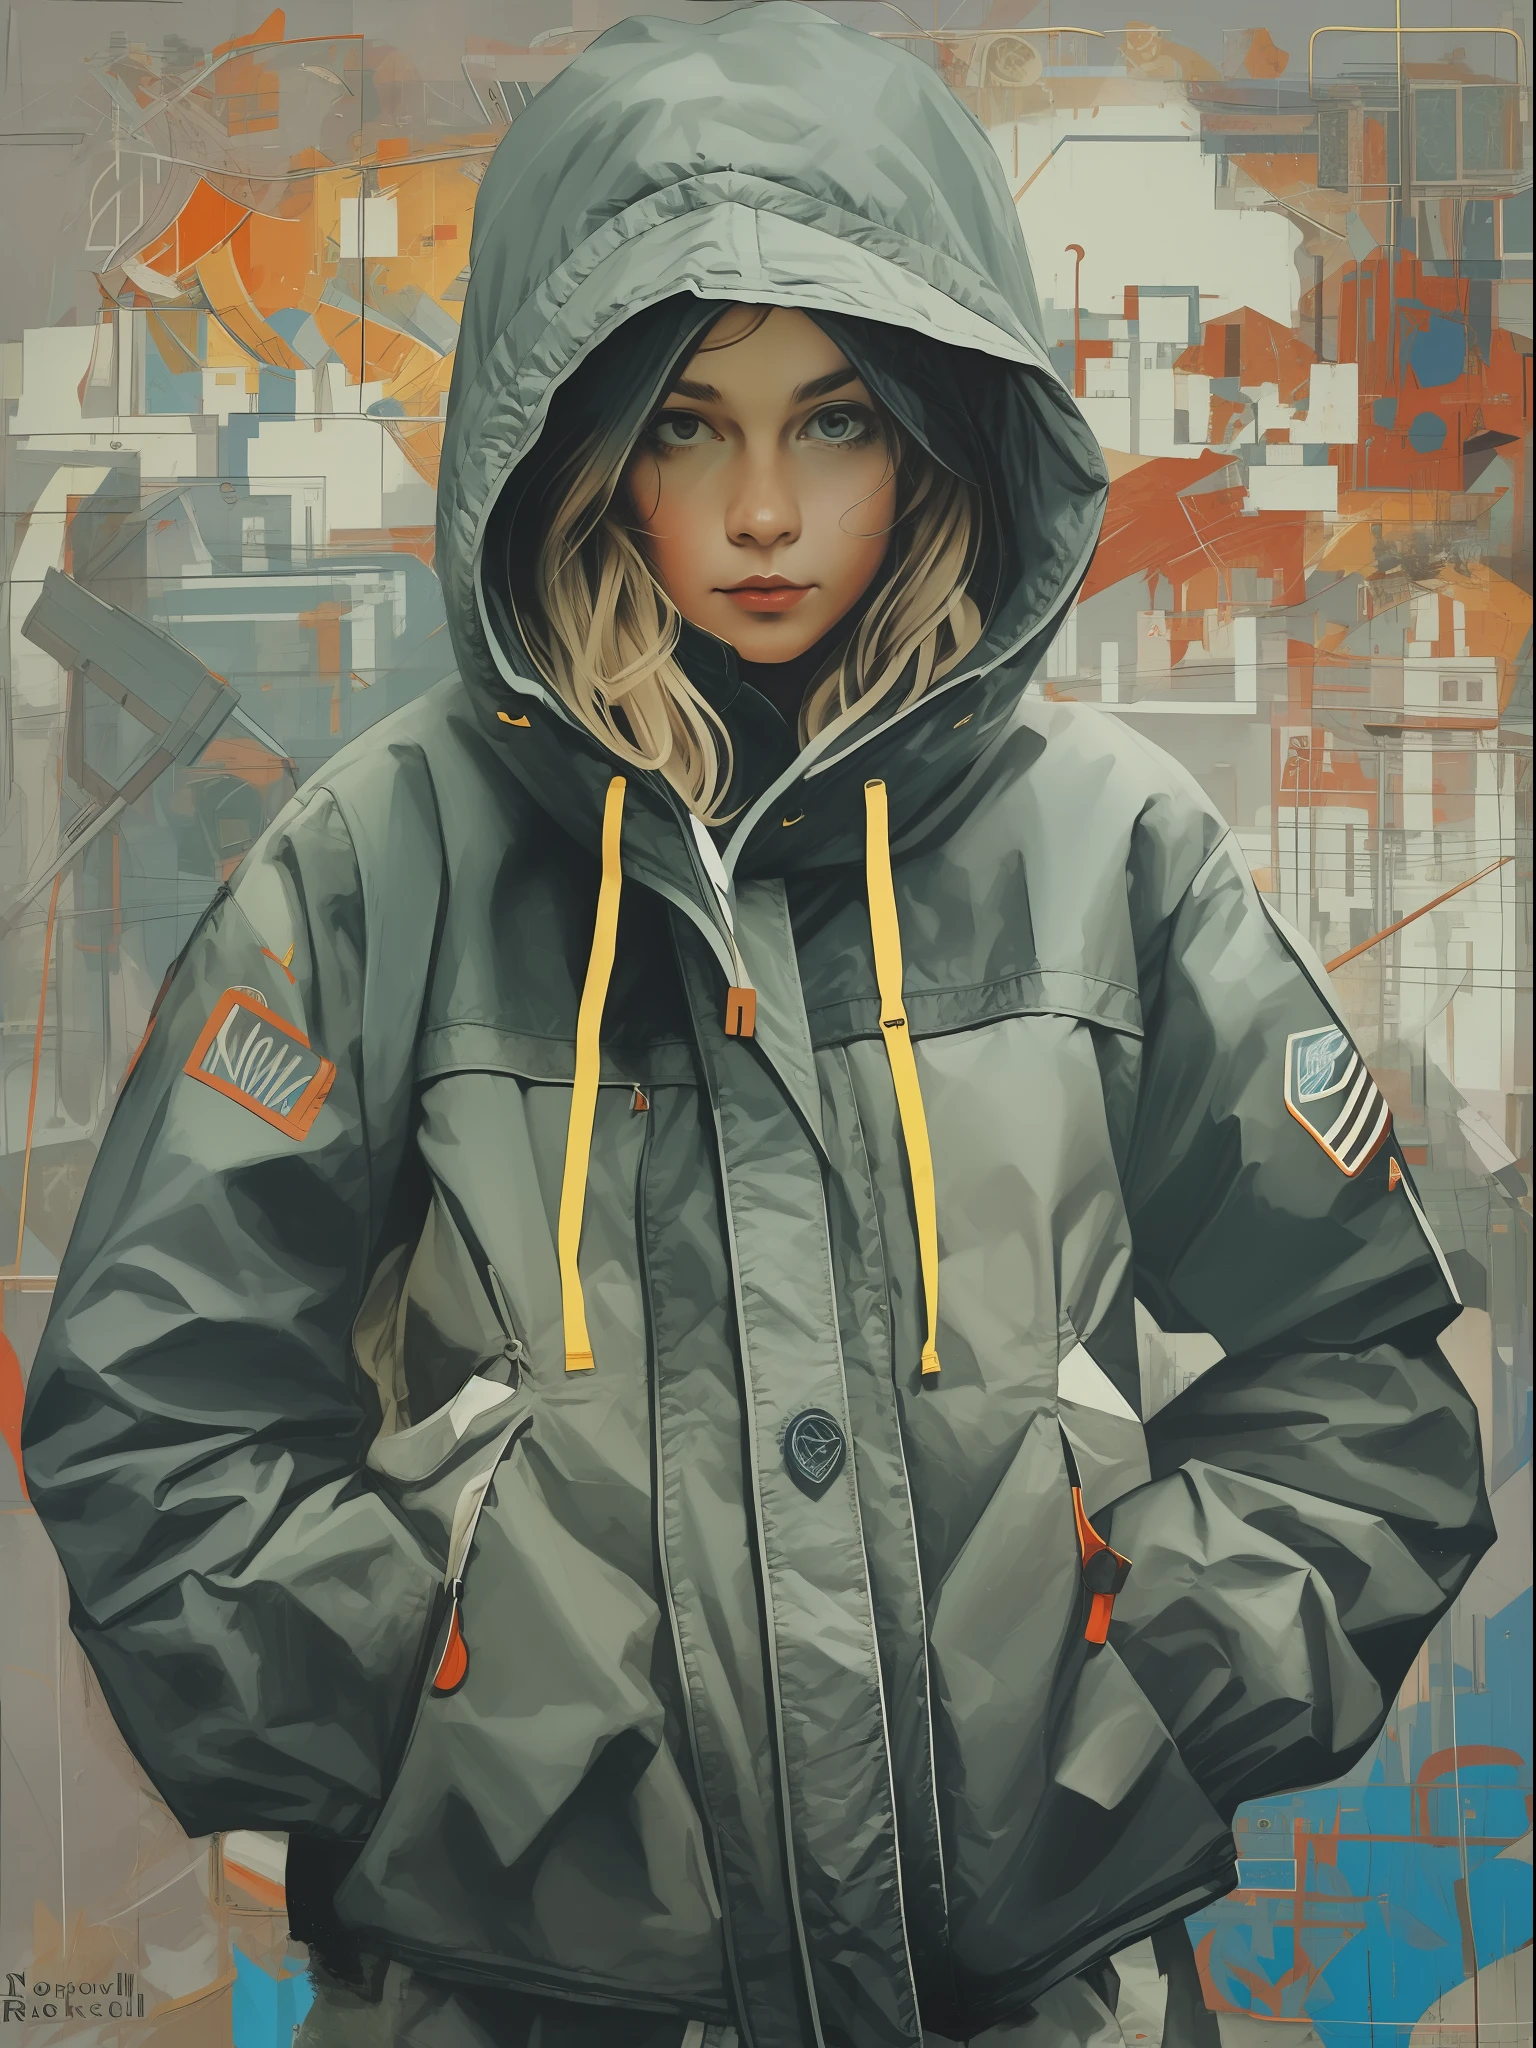 1 cute girl in techwear jacket, with a hood, against an abstract background, art inspired by Norman Rockwell.